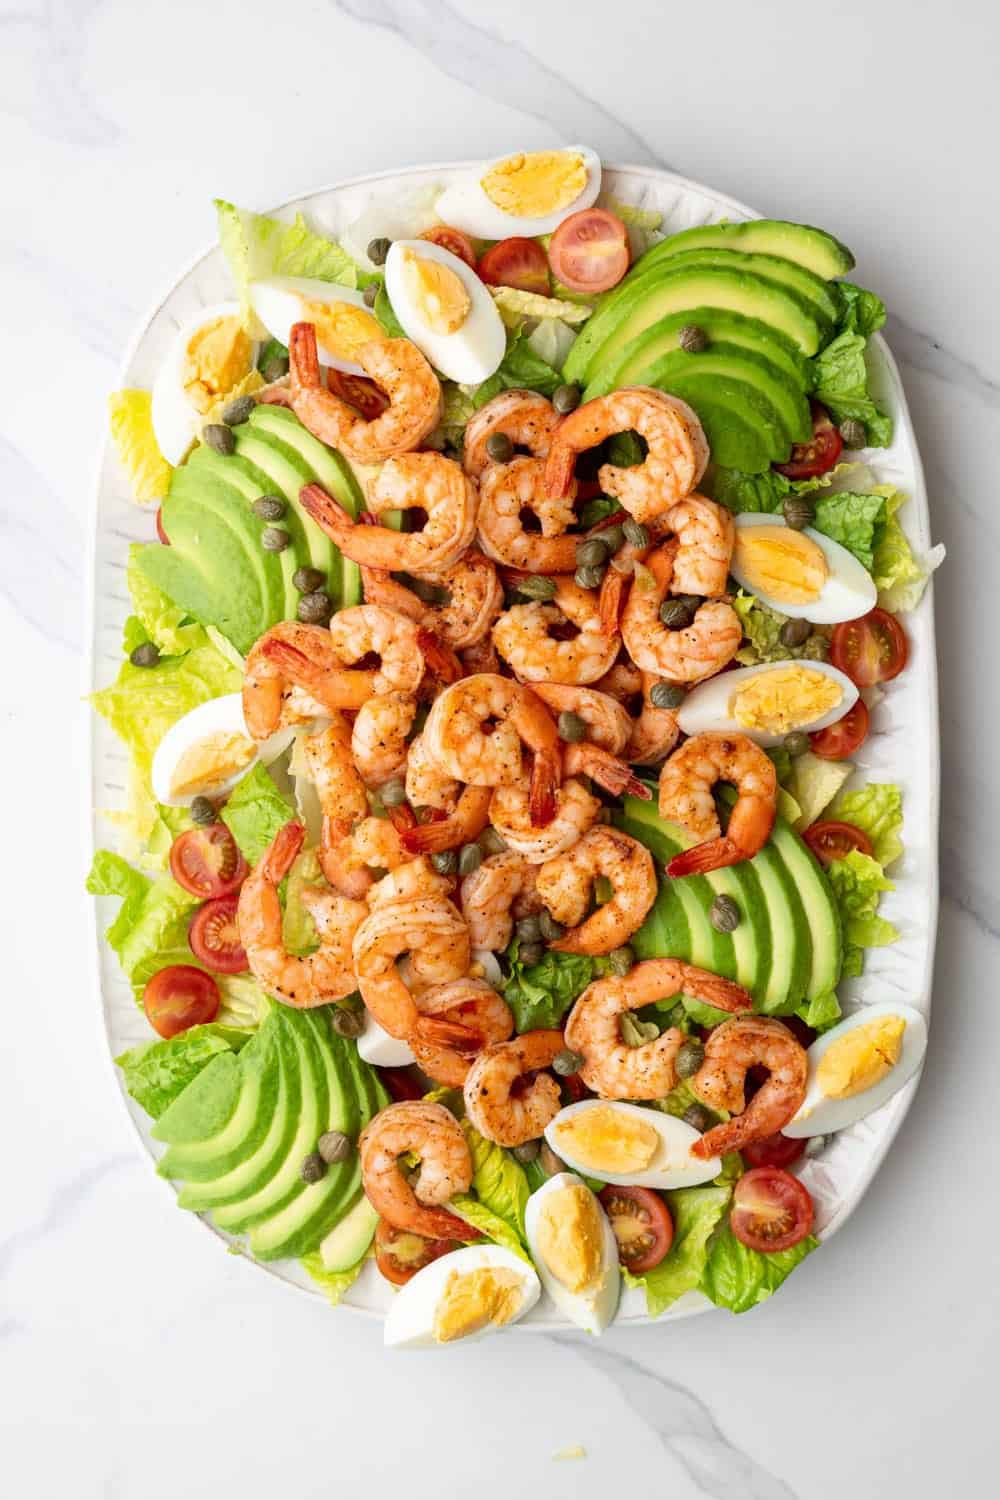 Hard boiled eggs and shrimp with capers on a salad.